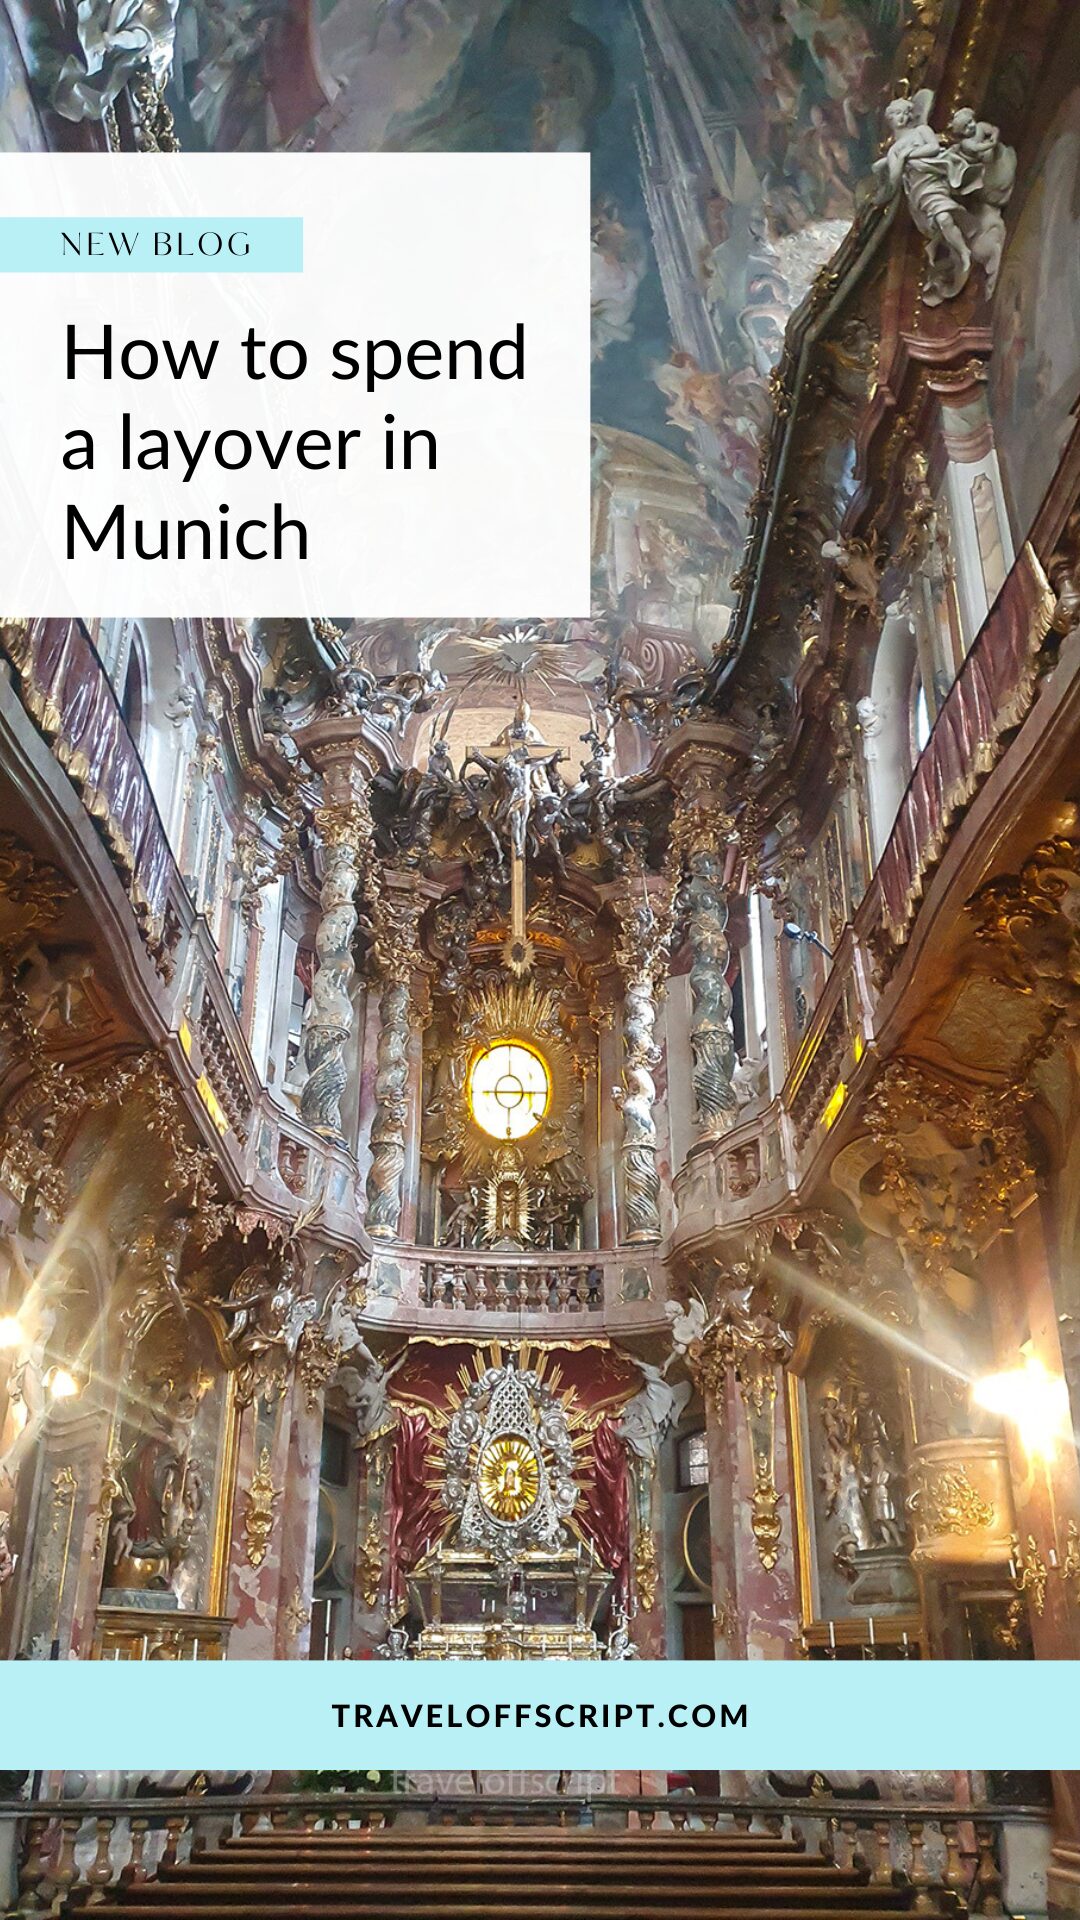 How to spend 6 hours in Munich travel guide - pinterest traveloffscript 2